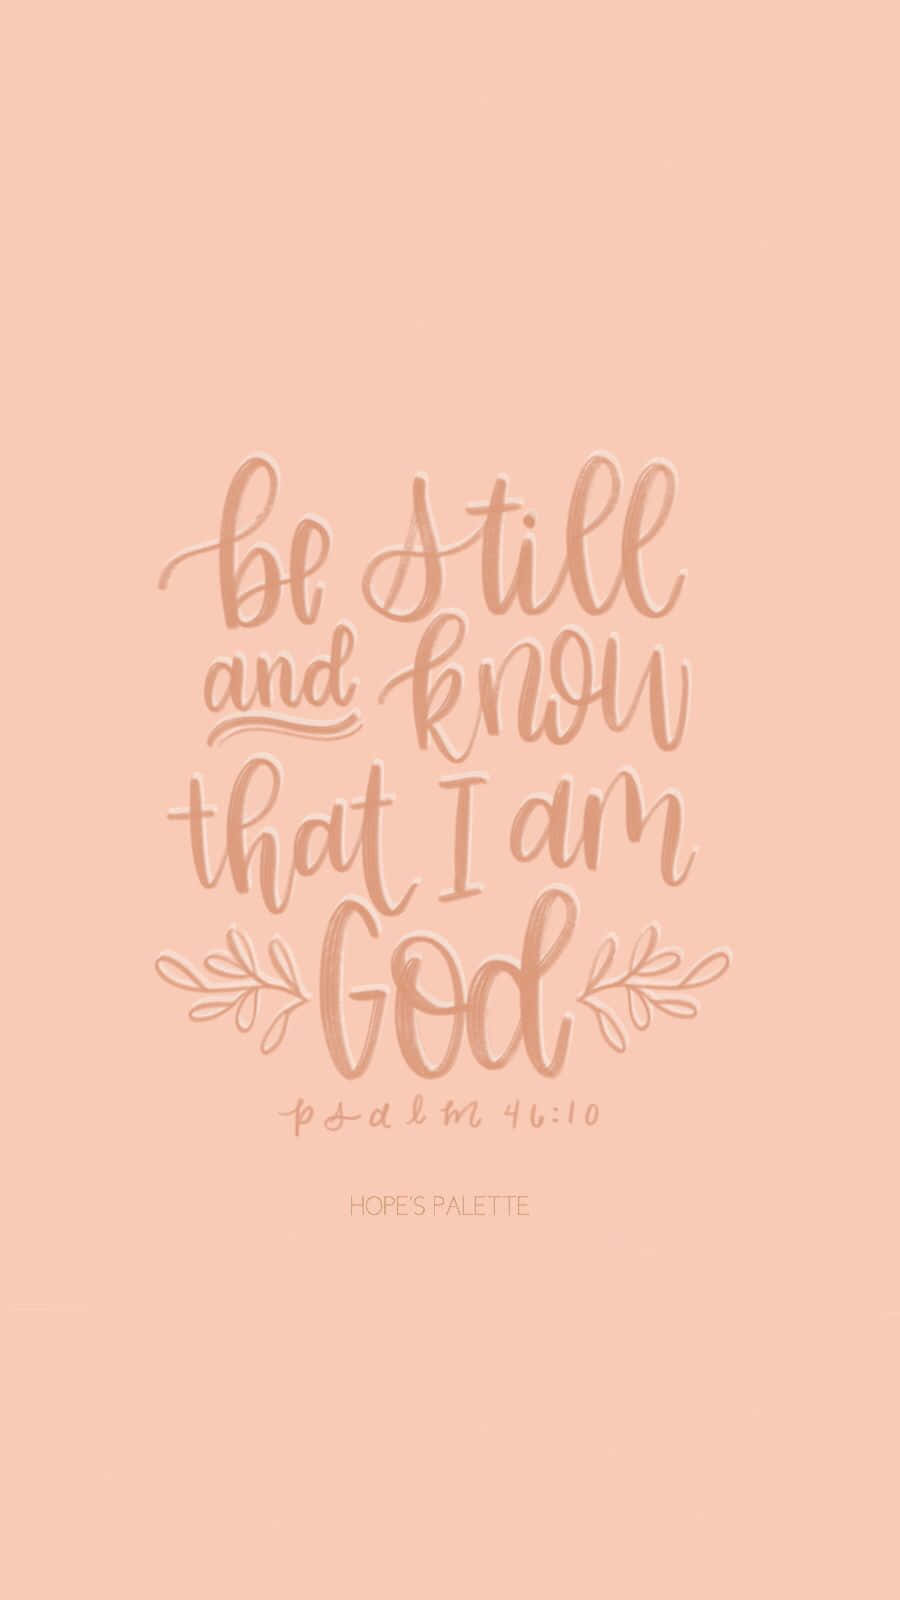 iPhone wallpaper - be still and know | Iphone wallpaper, Psalm 46, Wallpaper